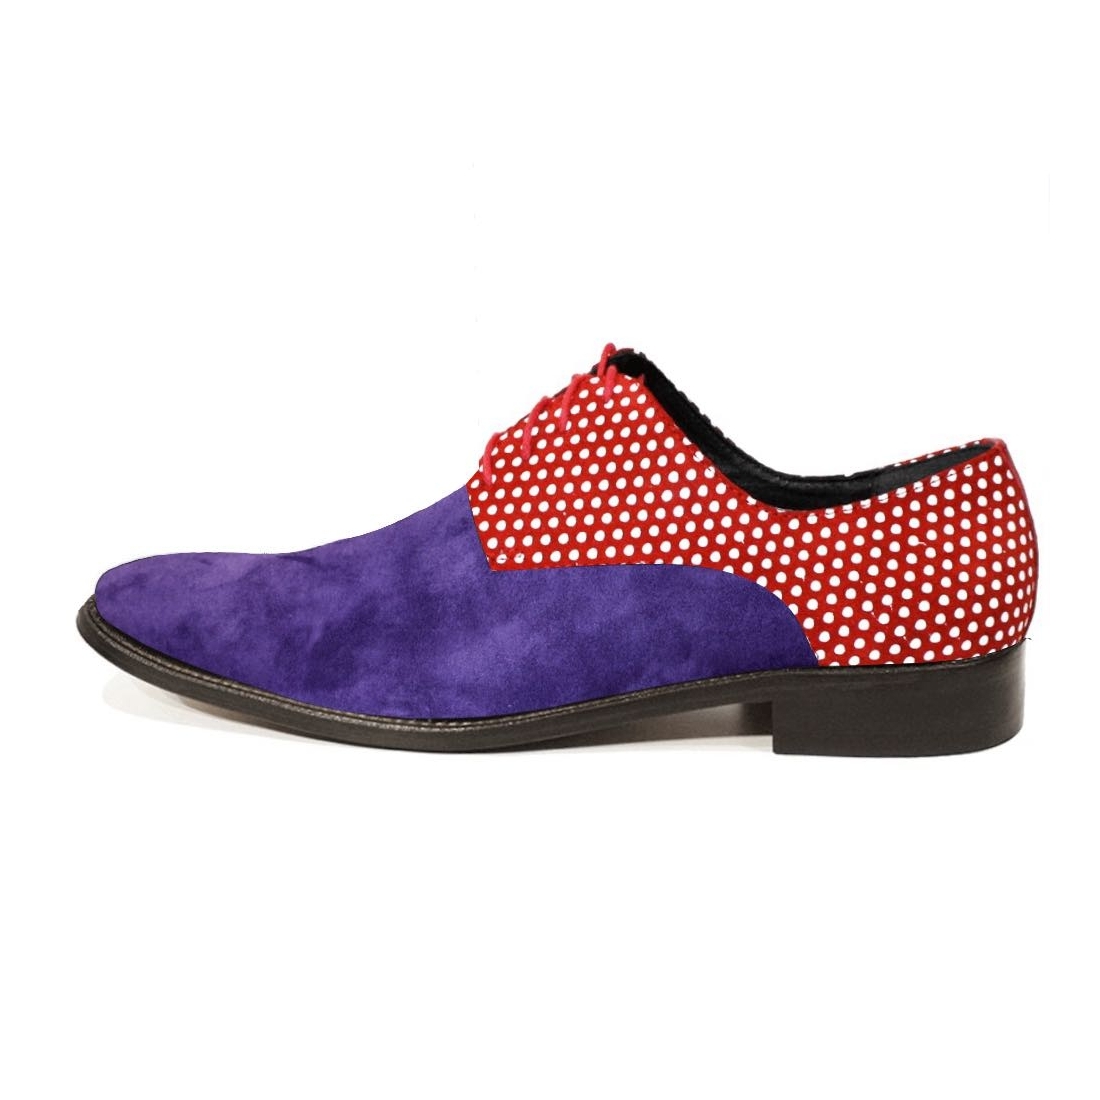 Modello Puntitto - Classic Shoes - Handmade Colorful Italian Leather Shoes